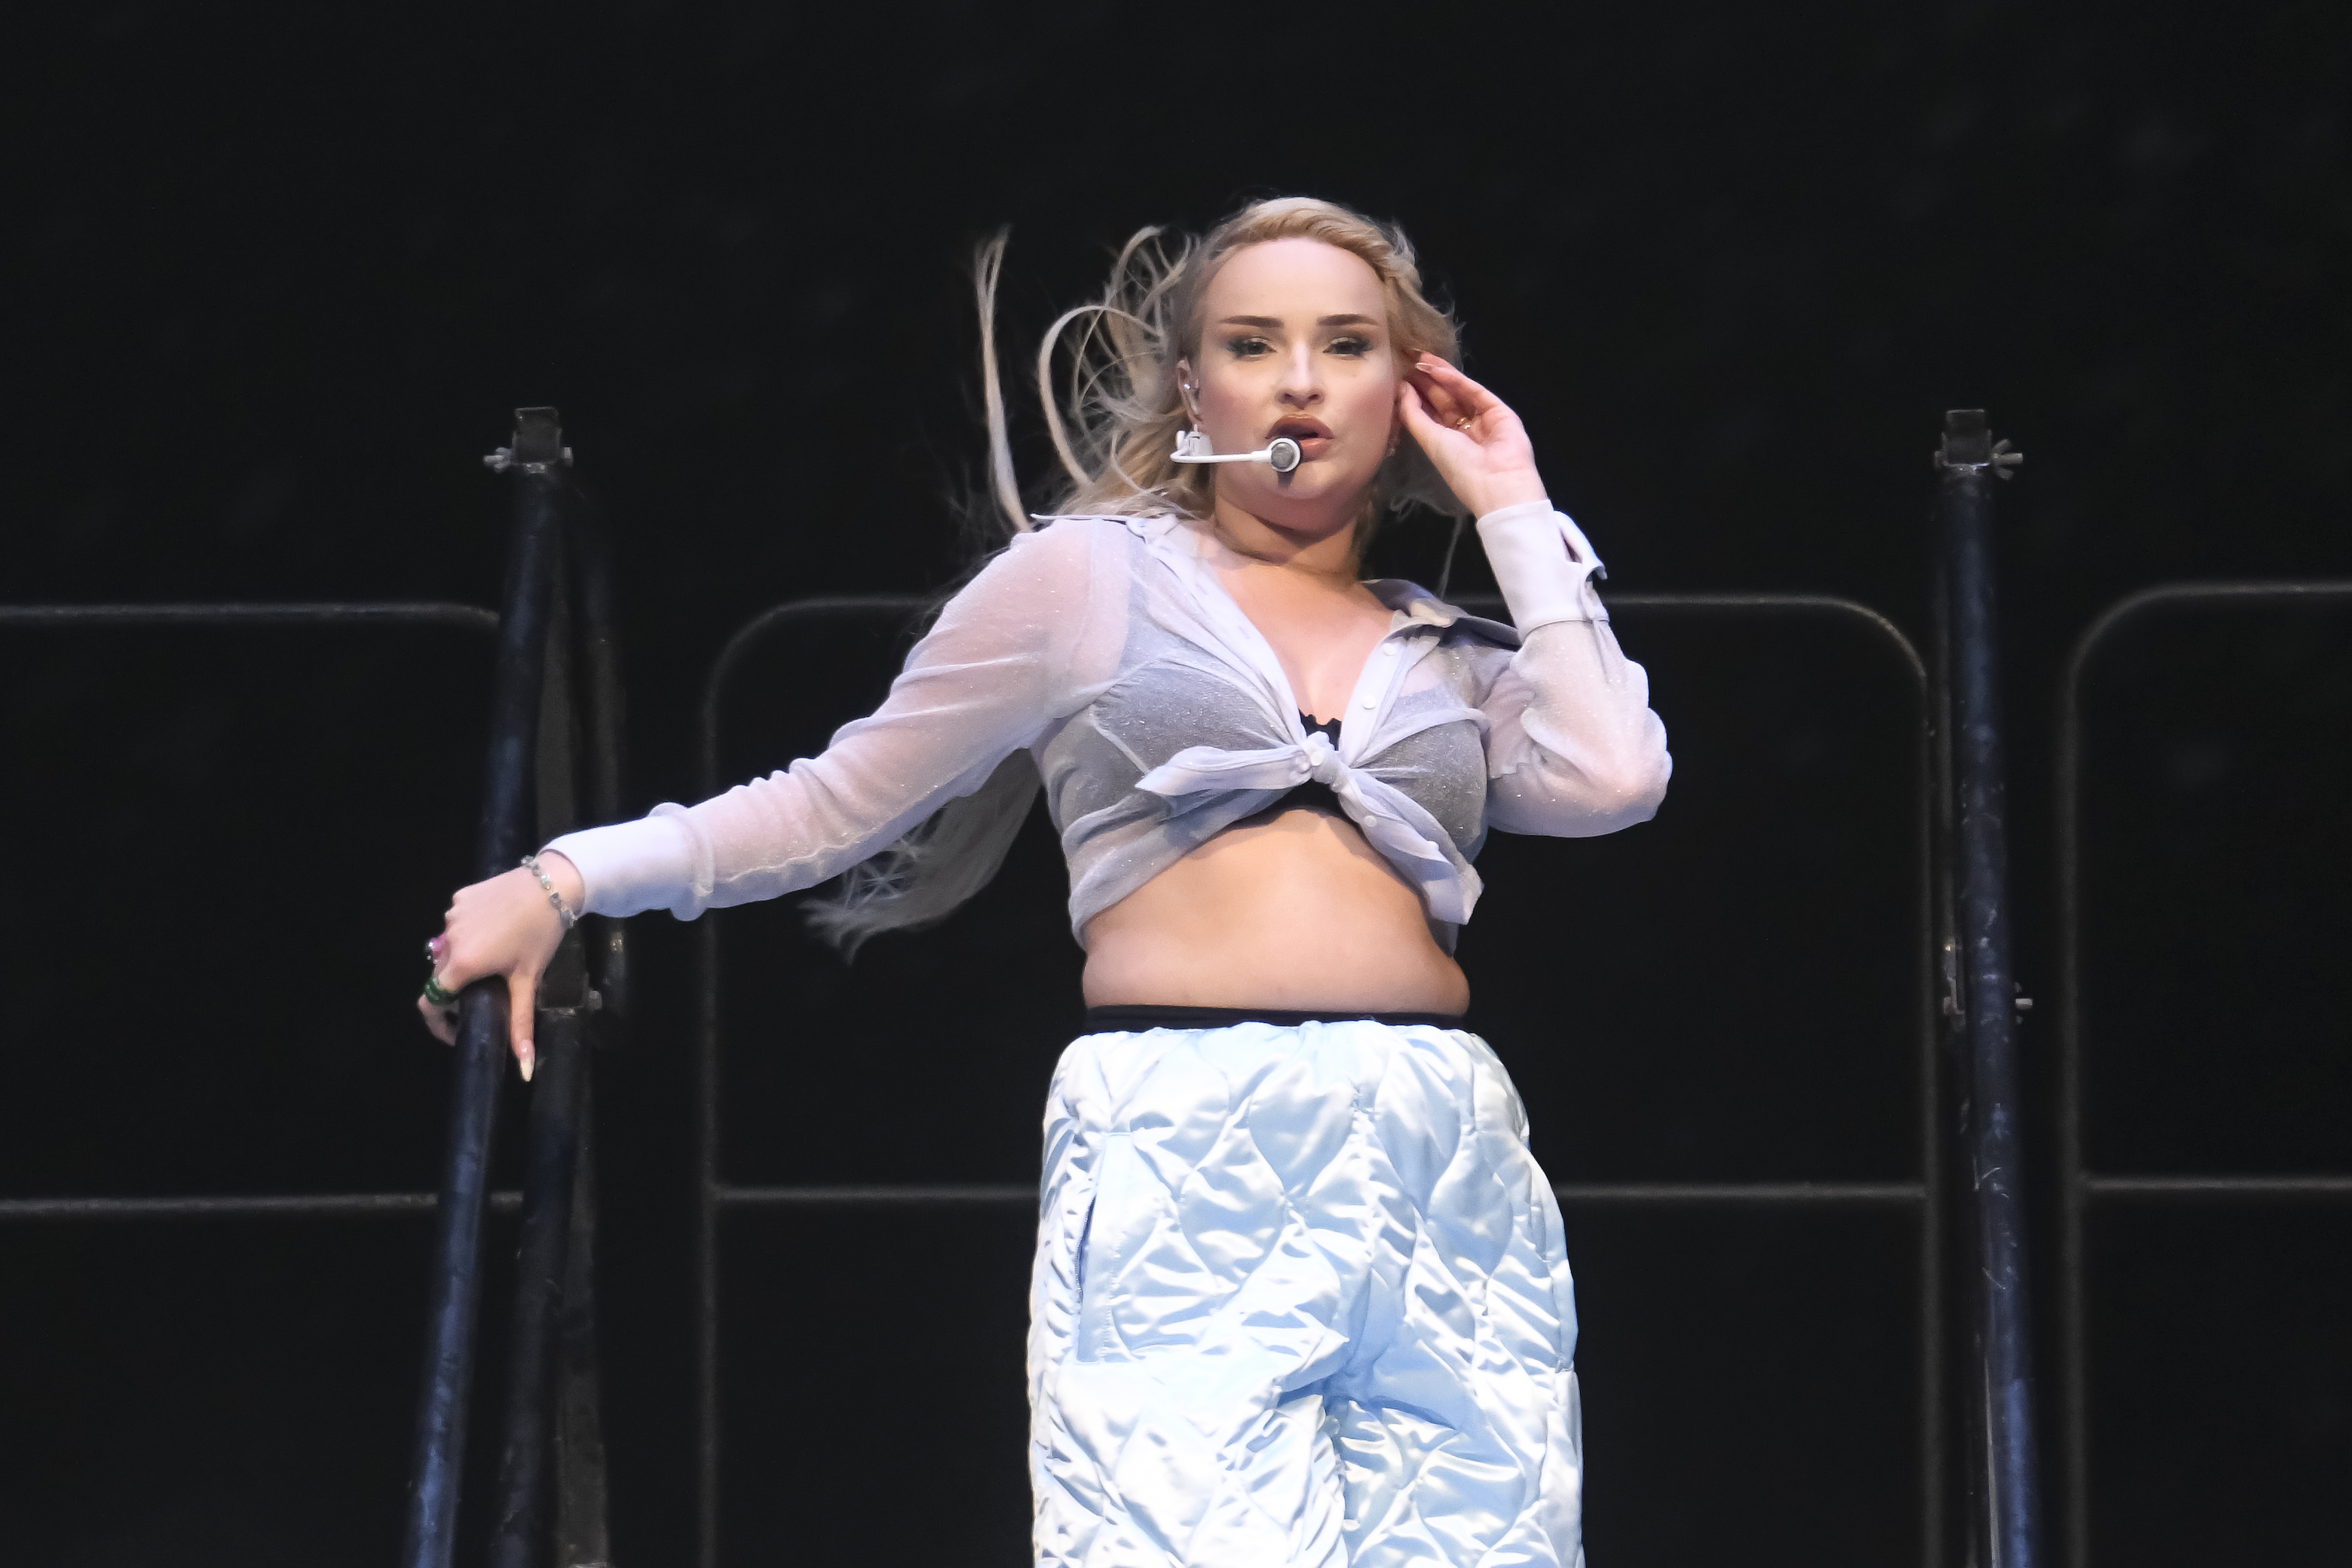 'Future Starts Now' artist, Kim Petras, performs at The Stone Pony in Asbury Park, New Jersey